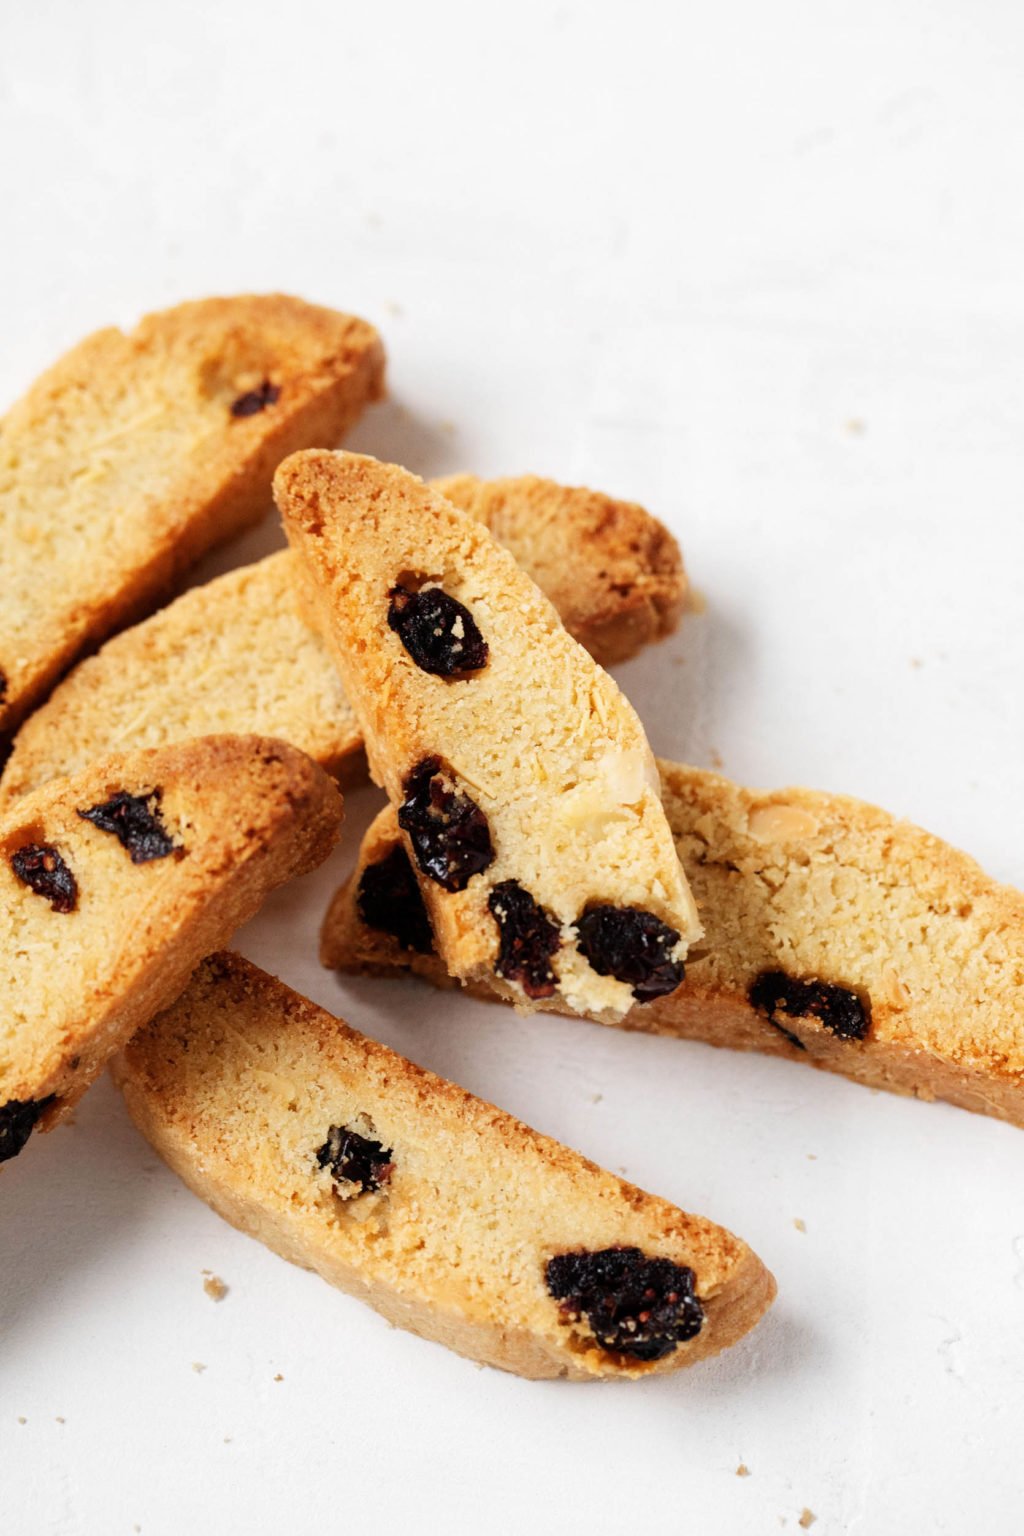  A small pile of vegan biscotti cookies, studded with cranberries.